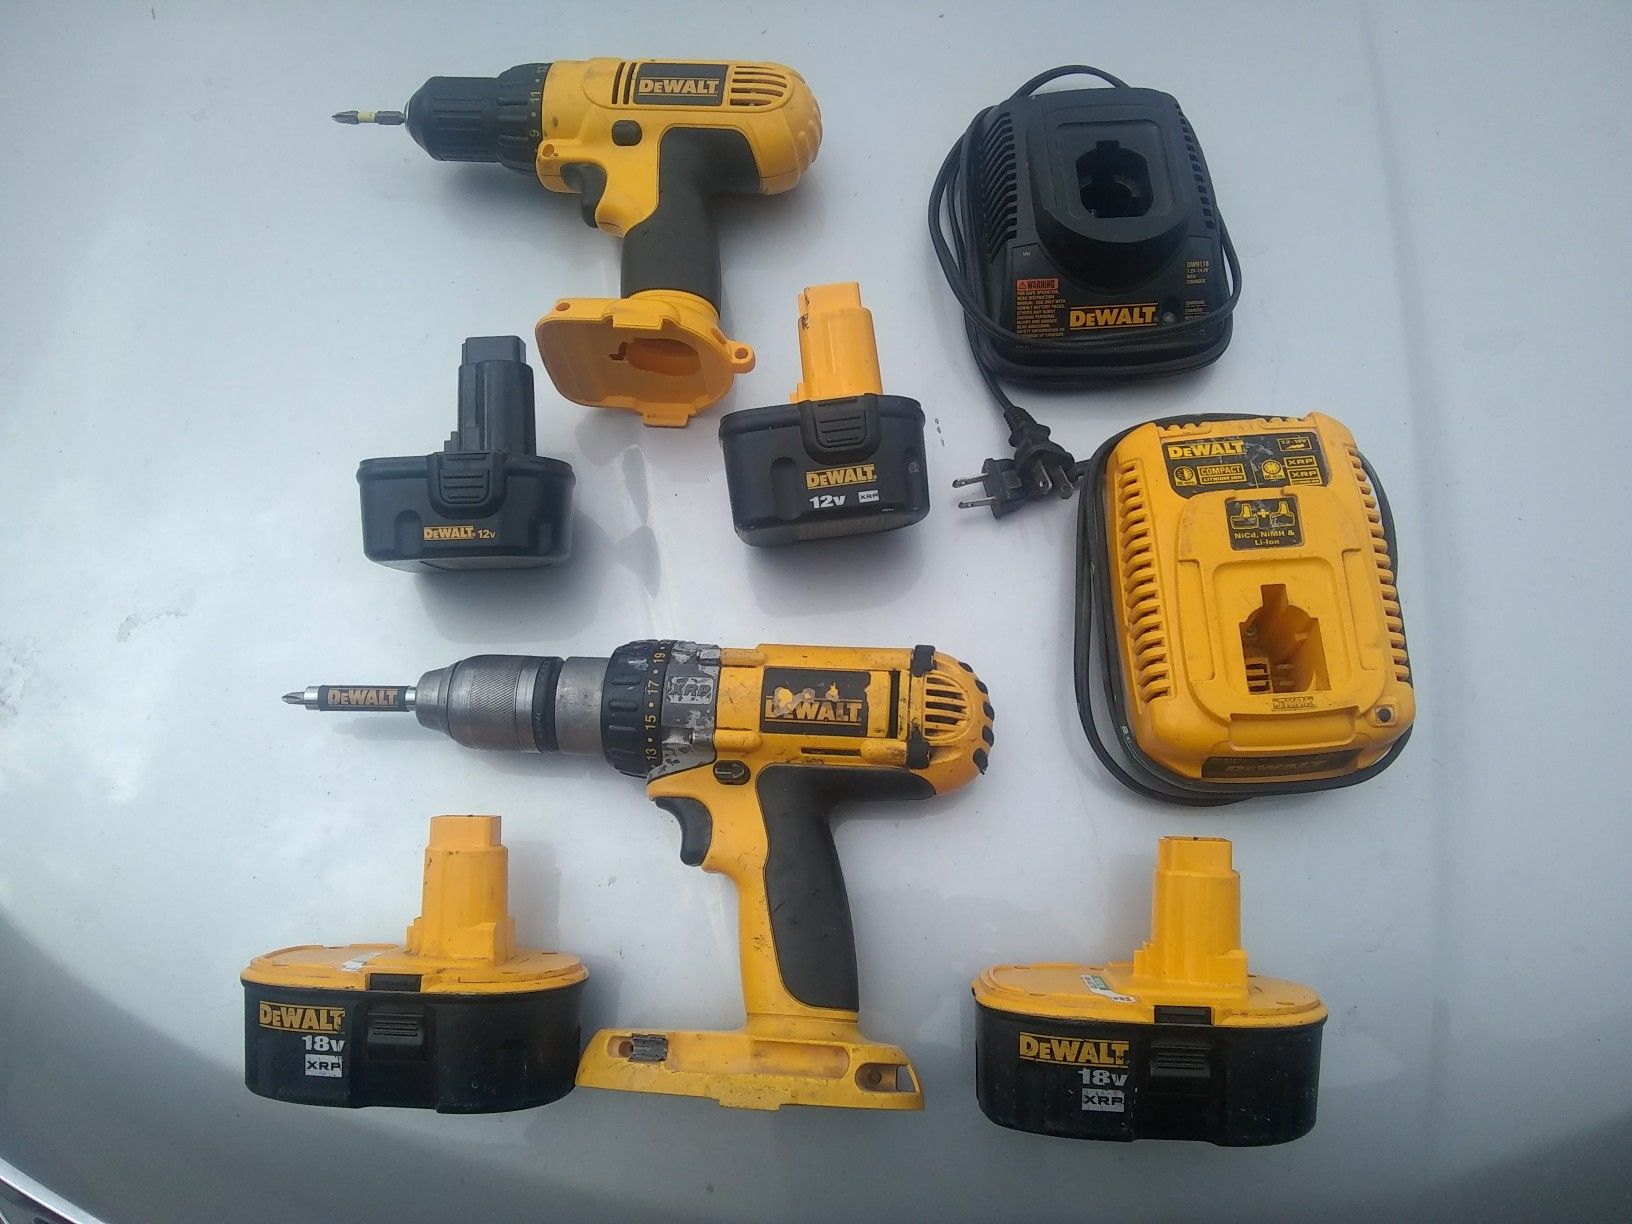 DC 727 and DC 987 wireless battery operated drill